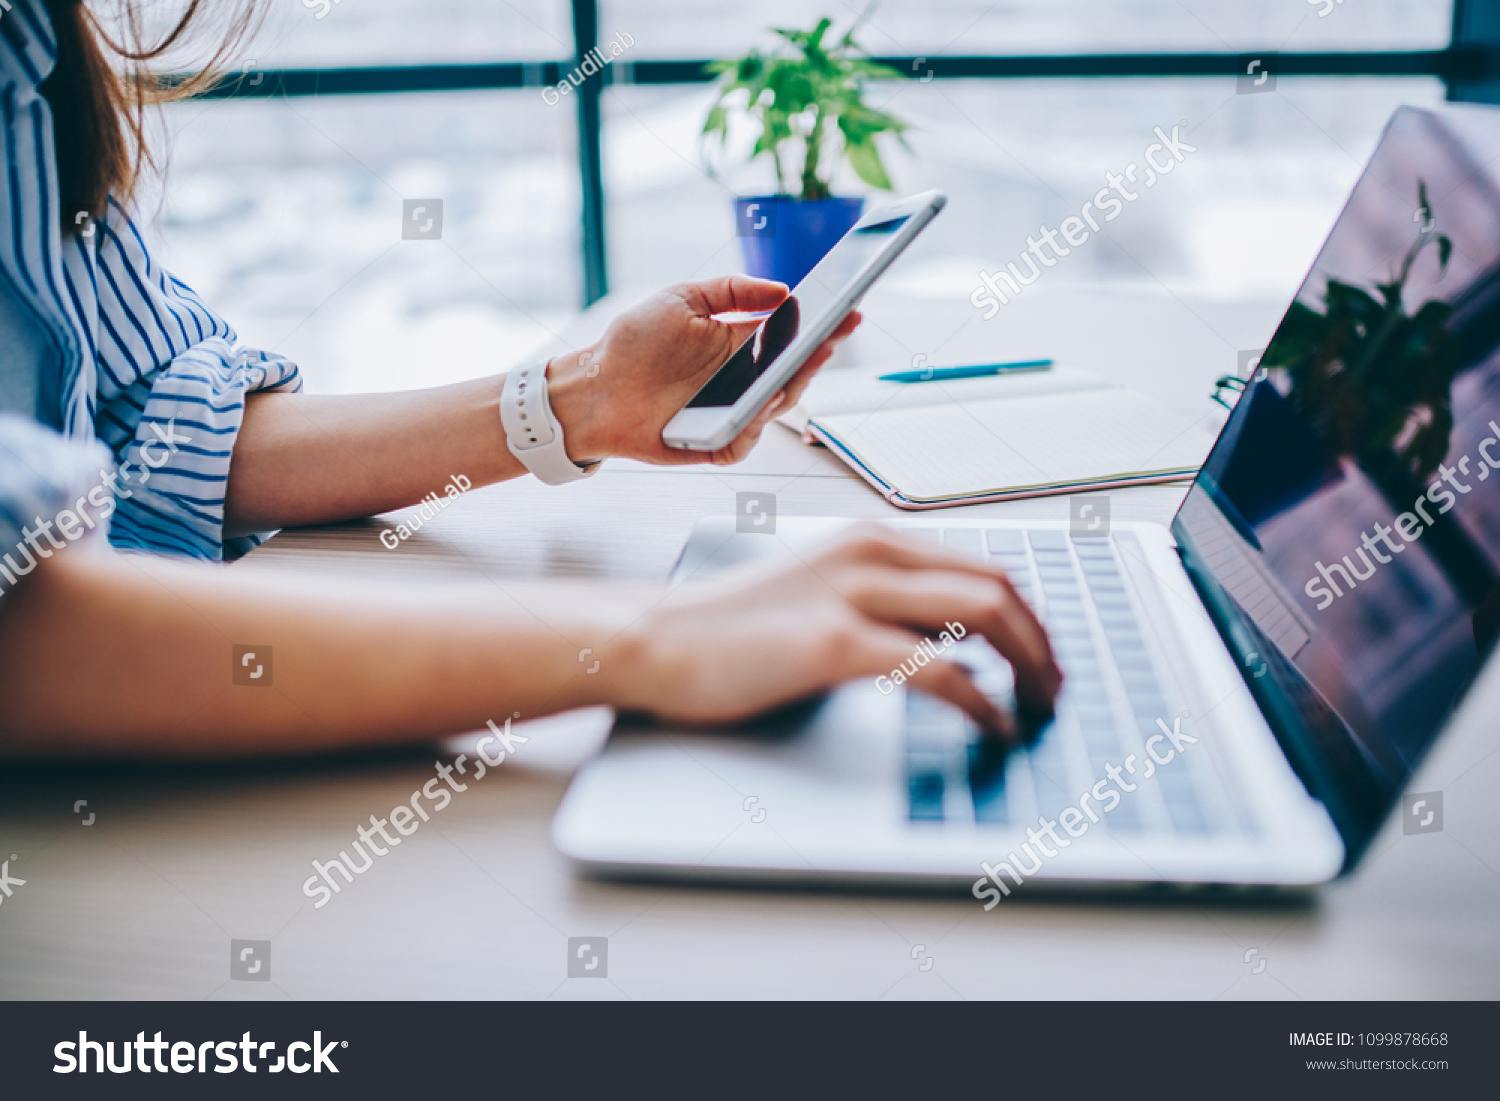 Cropped image of female holding smartphone getting message with confirmation making transaction on laptop computer,woman using mobile phone app for synchronizing data with netbook via bluetooth #1099878668